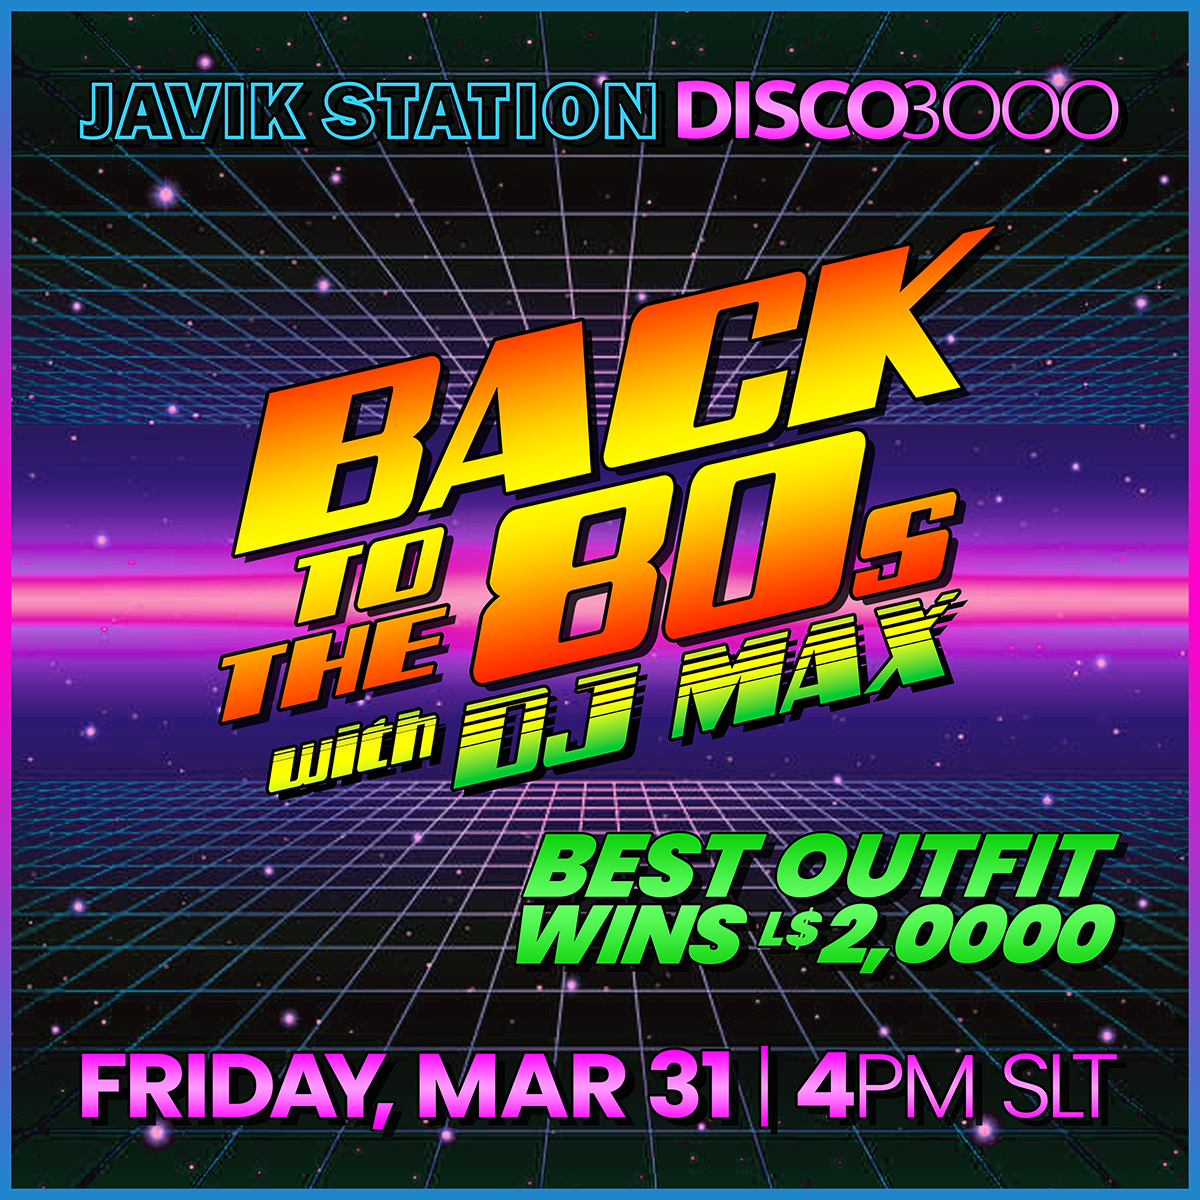 DISCO 3000 BACK TO THE 80s with DJ MAX!